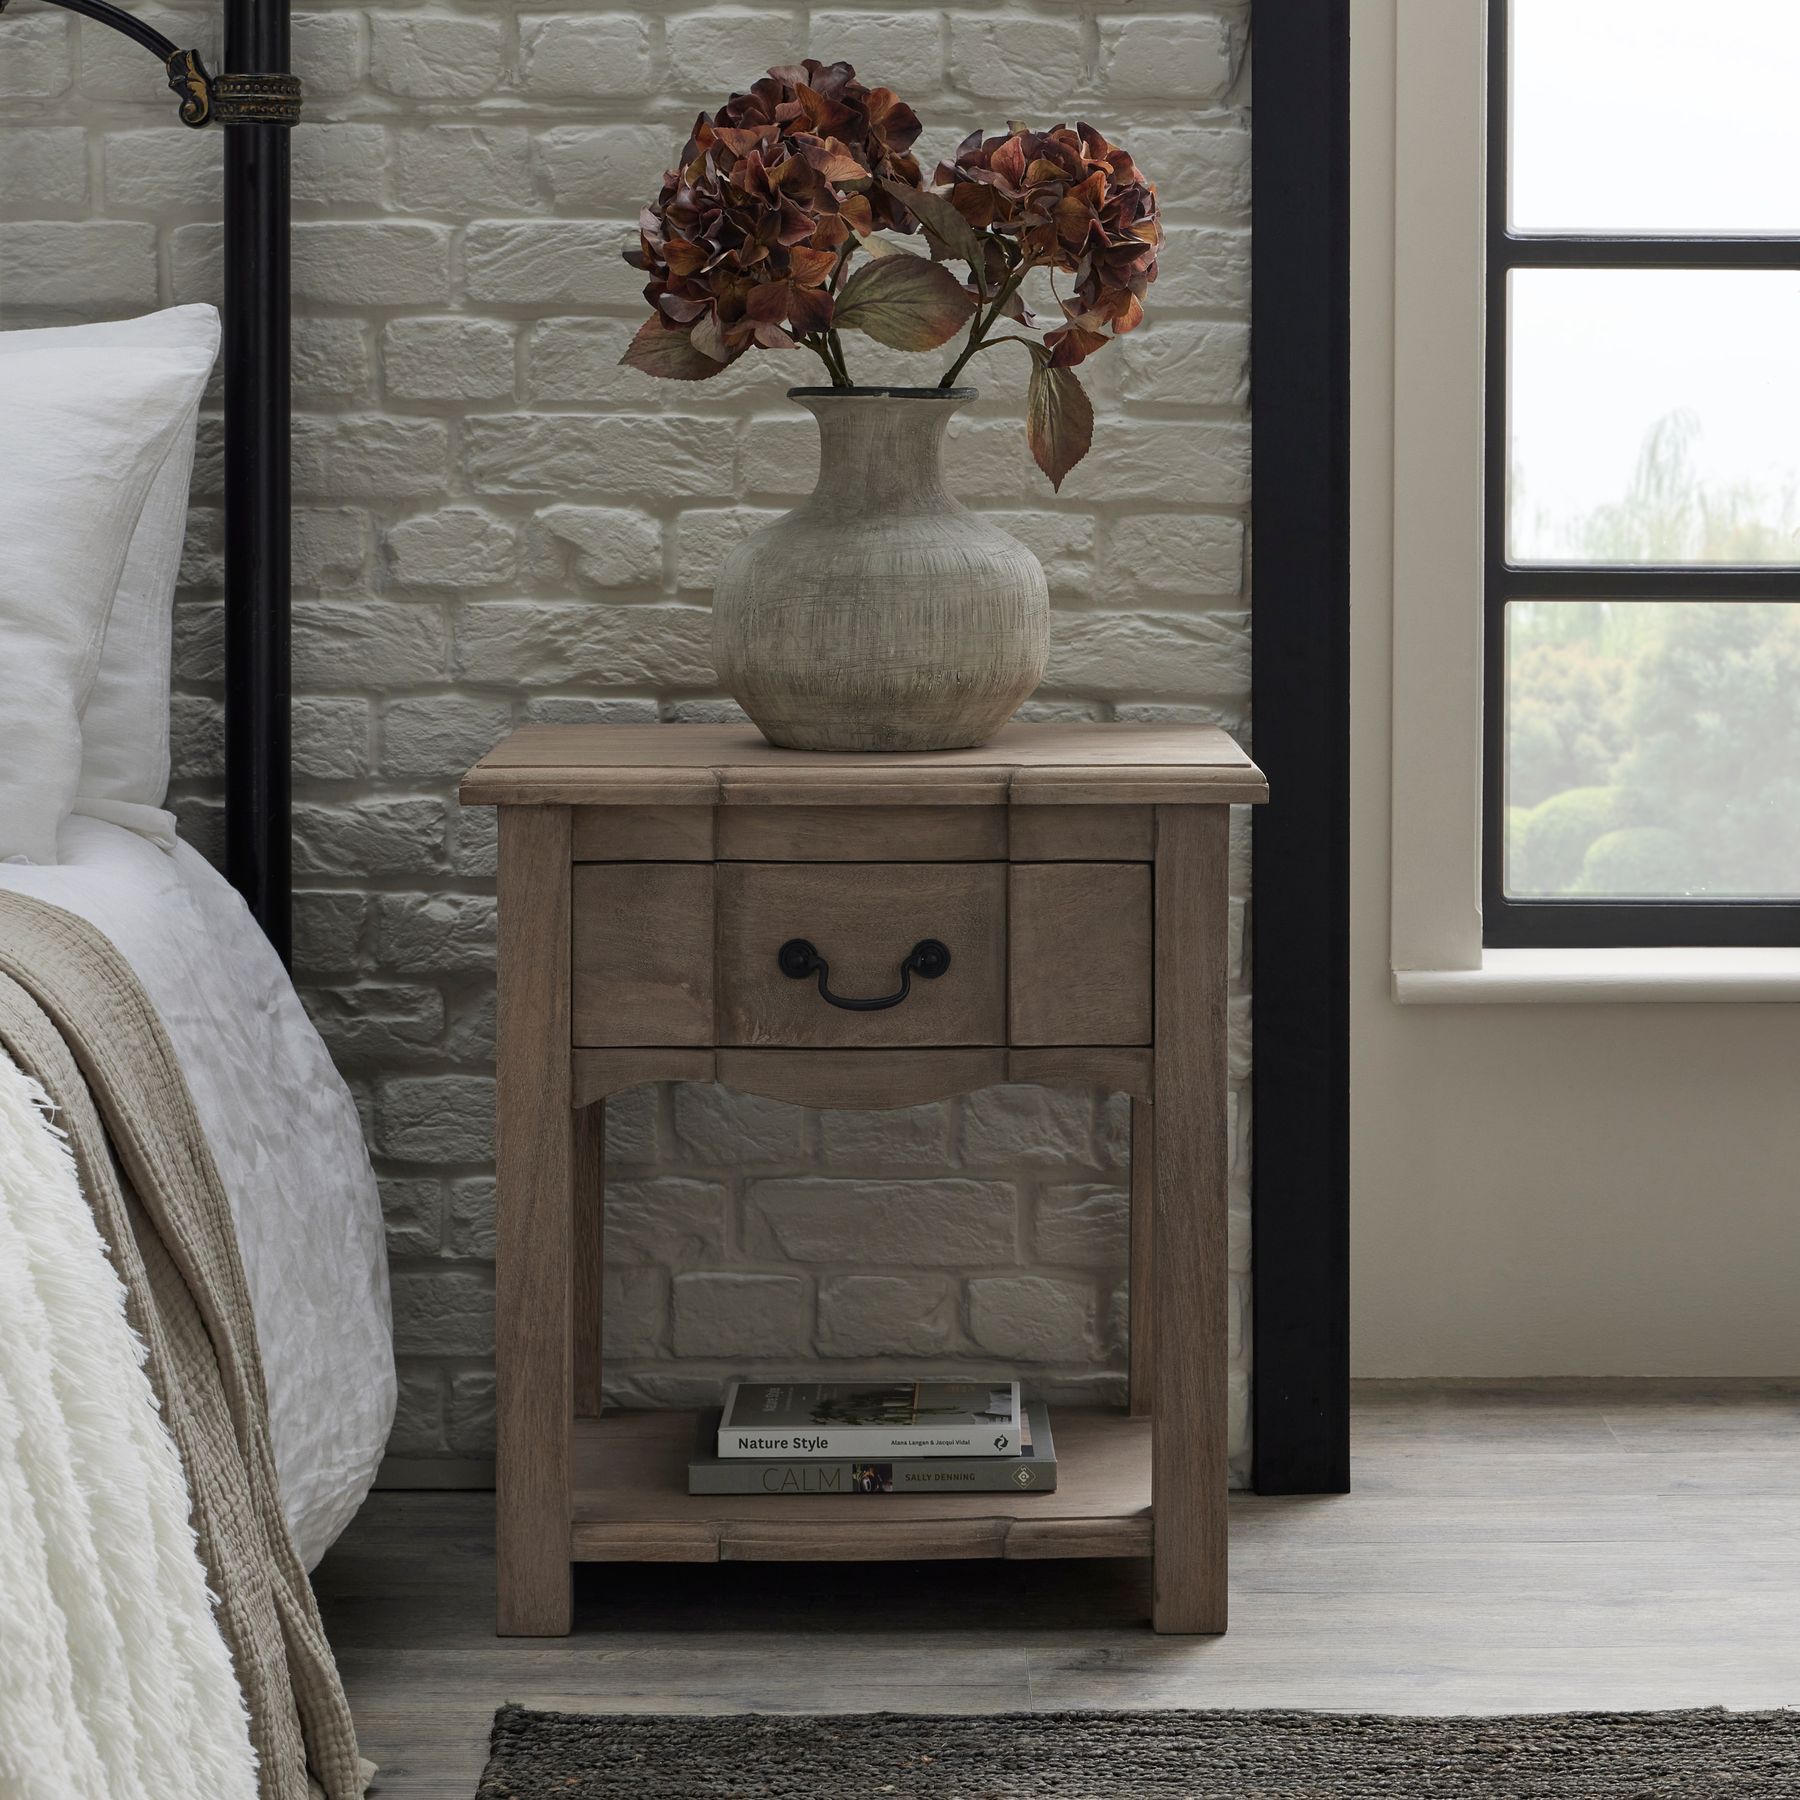 Copgrove Collection 1 Drawer Side Table